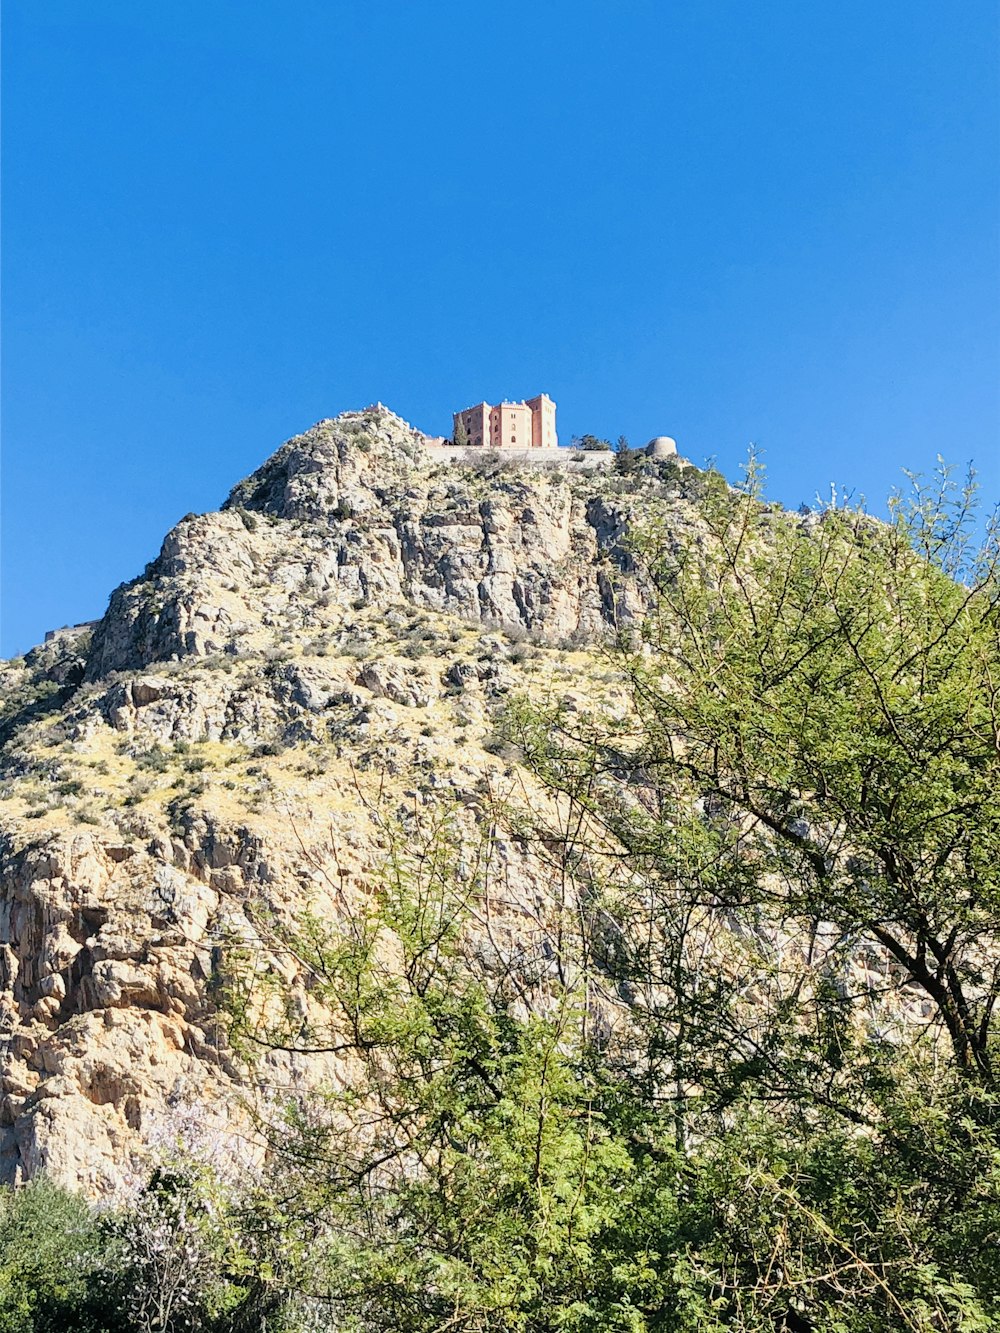 brown concrete building on top of gray rocky mountain under blue sky during daytime